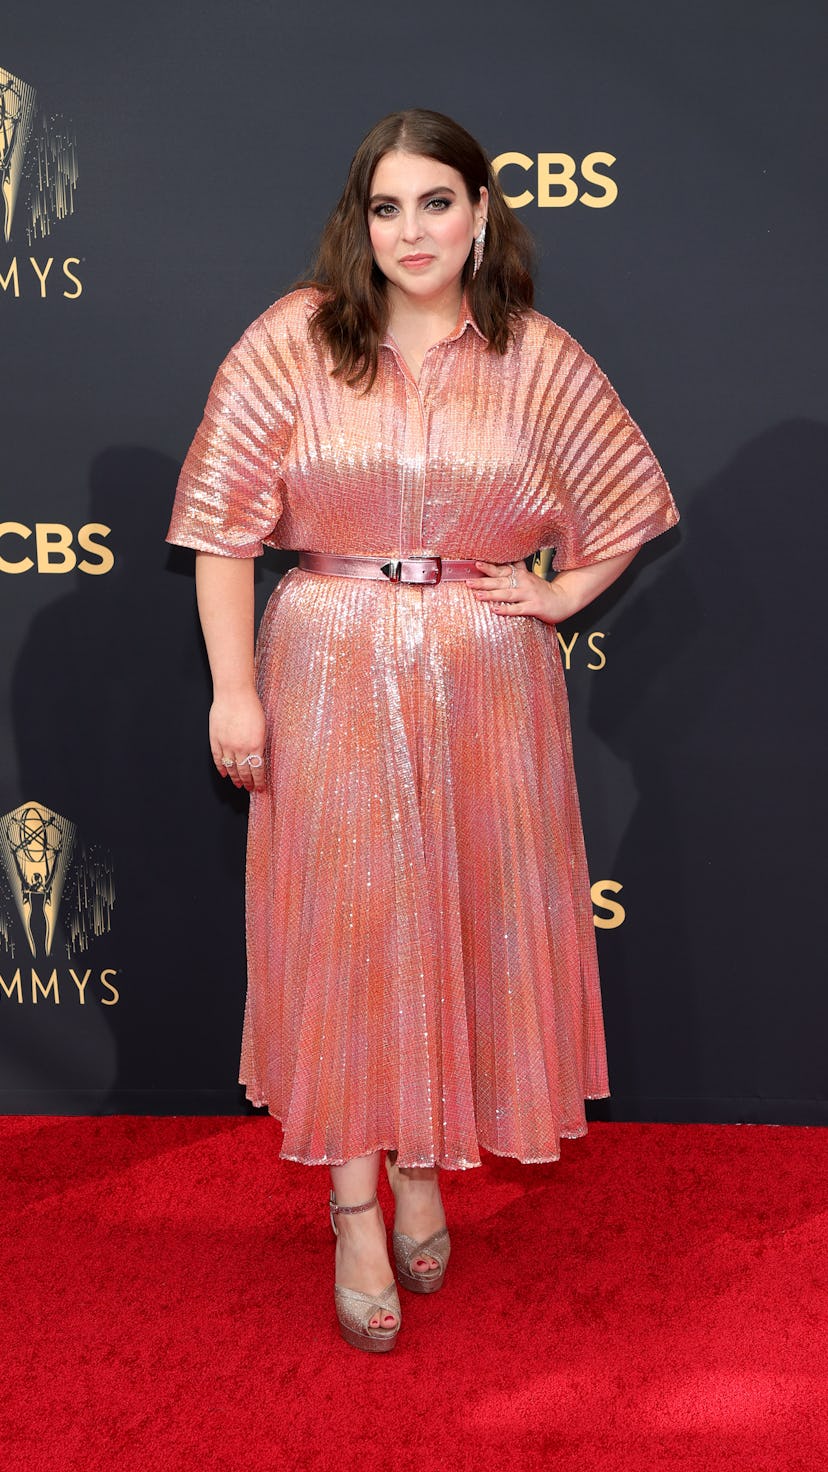 Several ensembles from the 2021 Emmys red carpet channeled 2000s fashion. Ahead, a few of the most '...